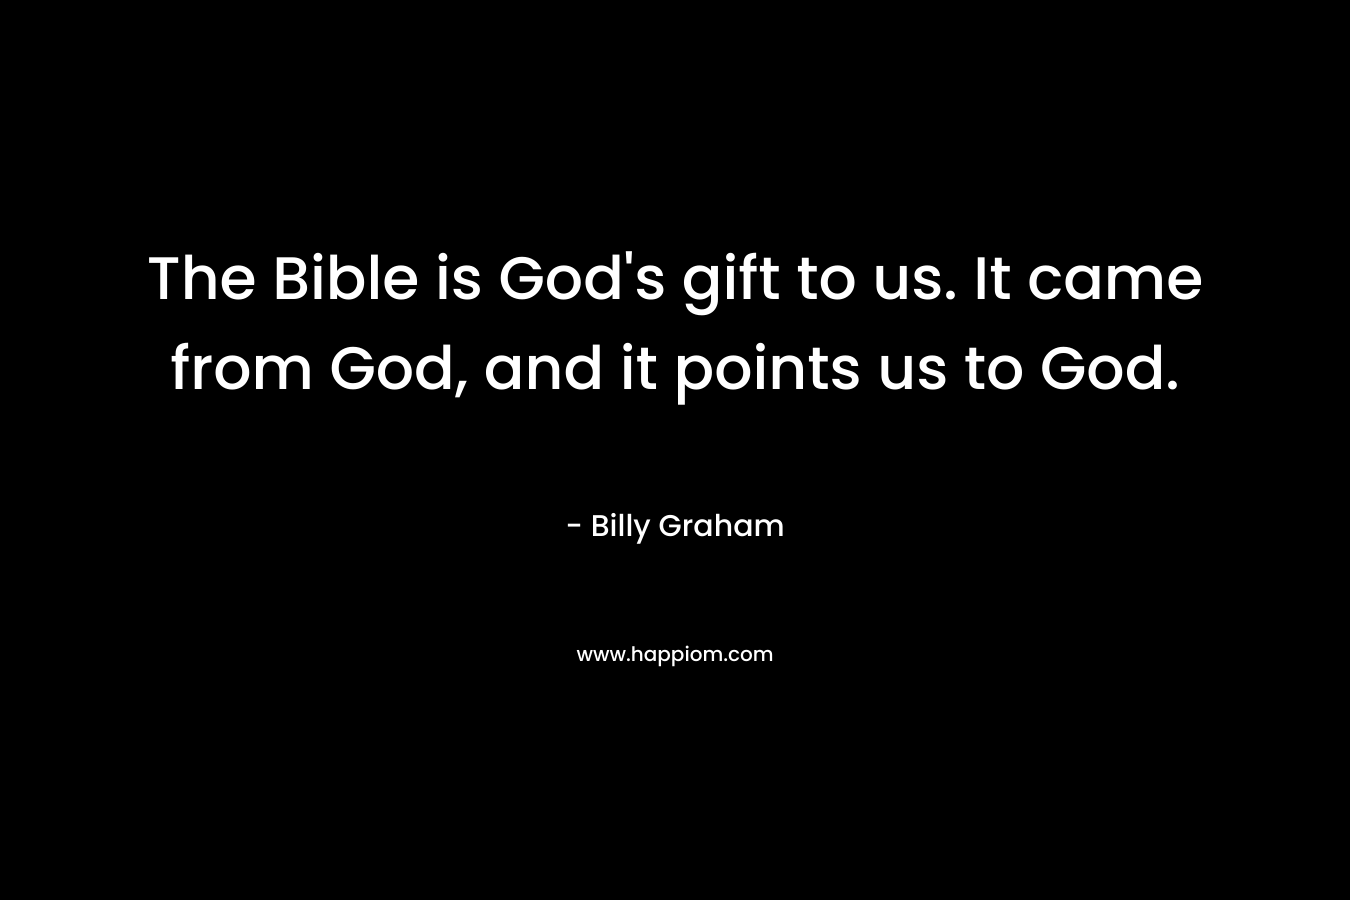 The Bible is God's gift to us. It came from God, and it points us to God.